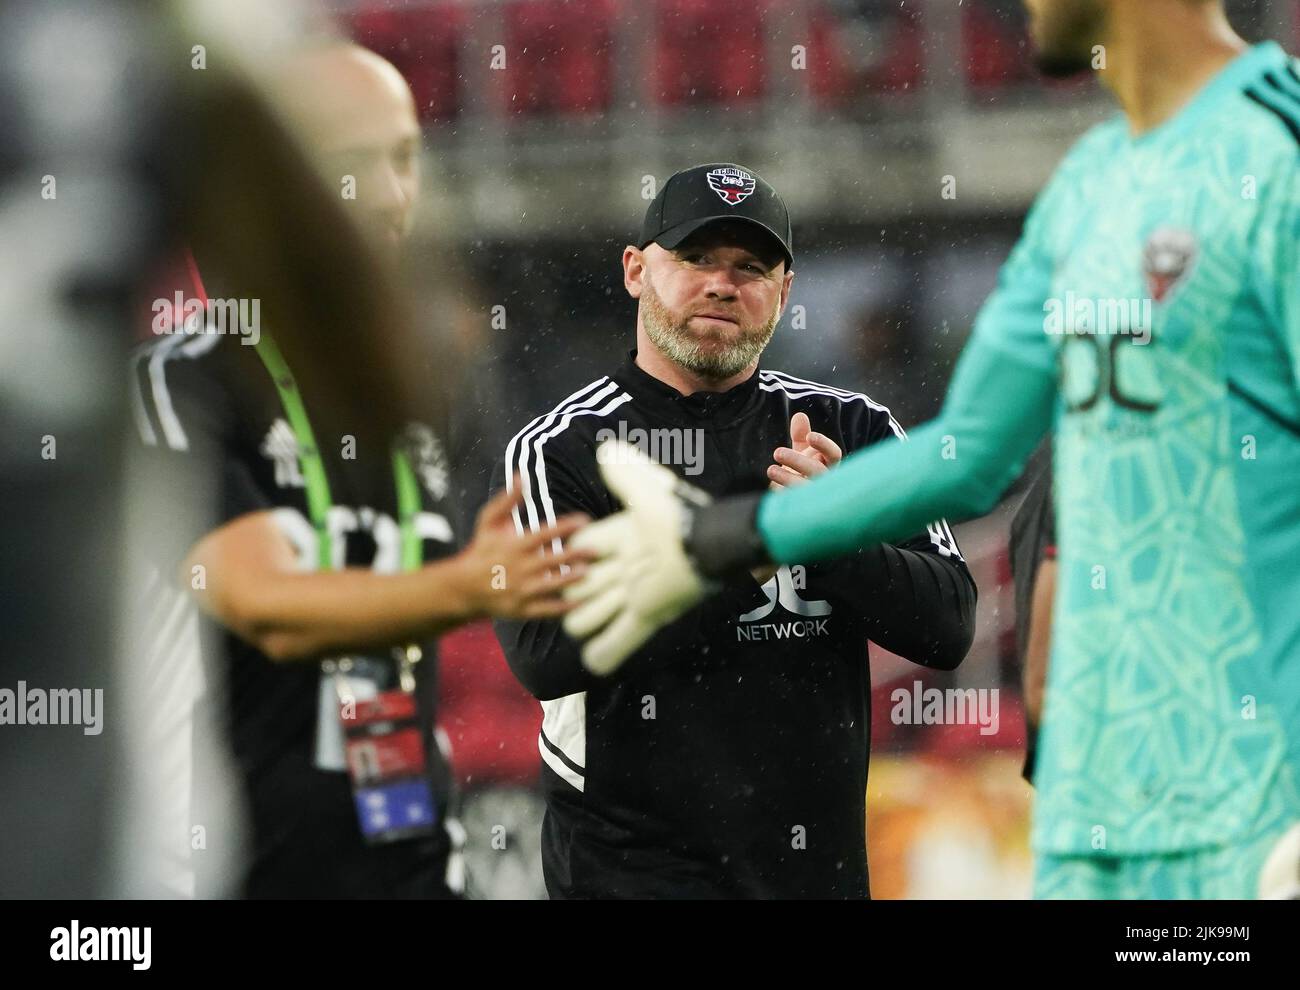 WASHINGTON, DC, USA - 31 JULY 2022: Head coach Wayne Rooney leaves the pitch with a smile on his face after a come from behind victory in extra time during a MLS match between D.C United and the Orlando City SC, on July 31, 2022, at Audi Field, in Washington, DC. (Photo by Tony Quinn-Alamy Live News) Stock Photo